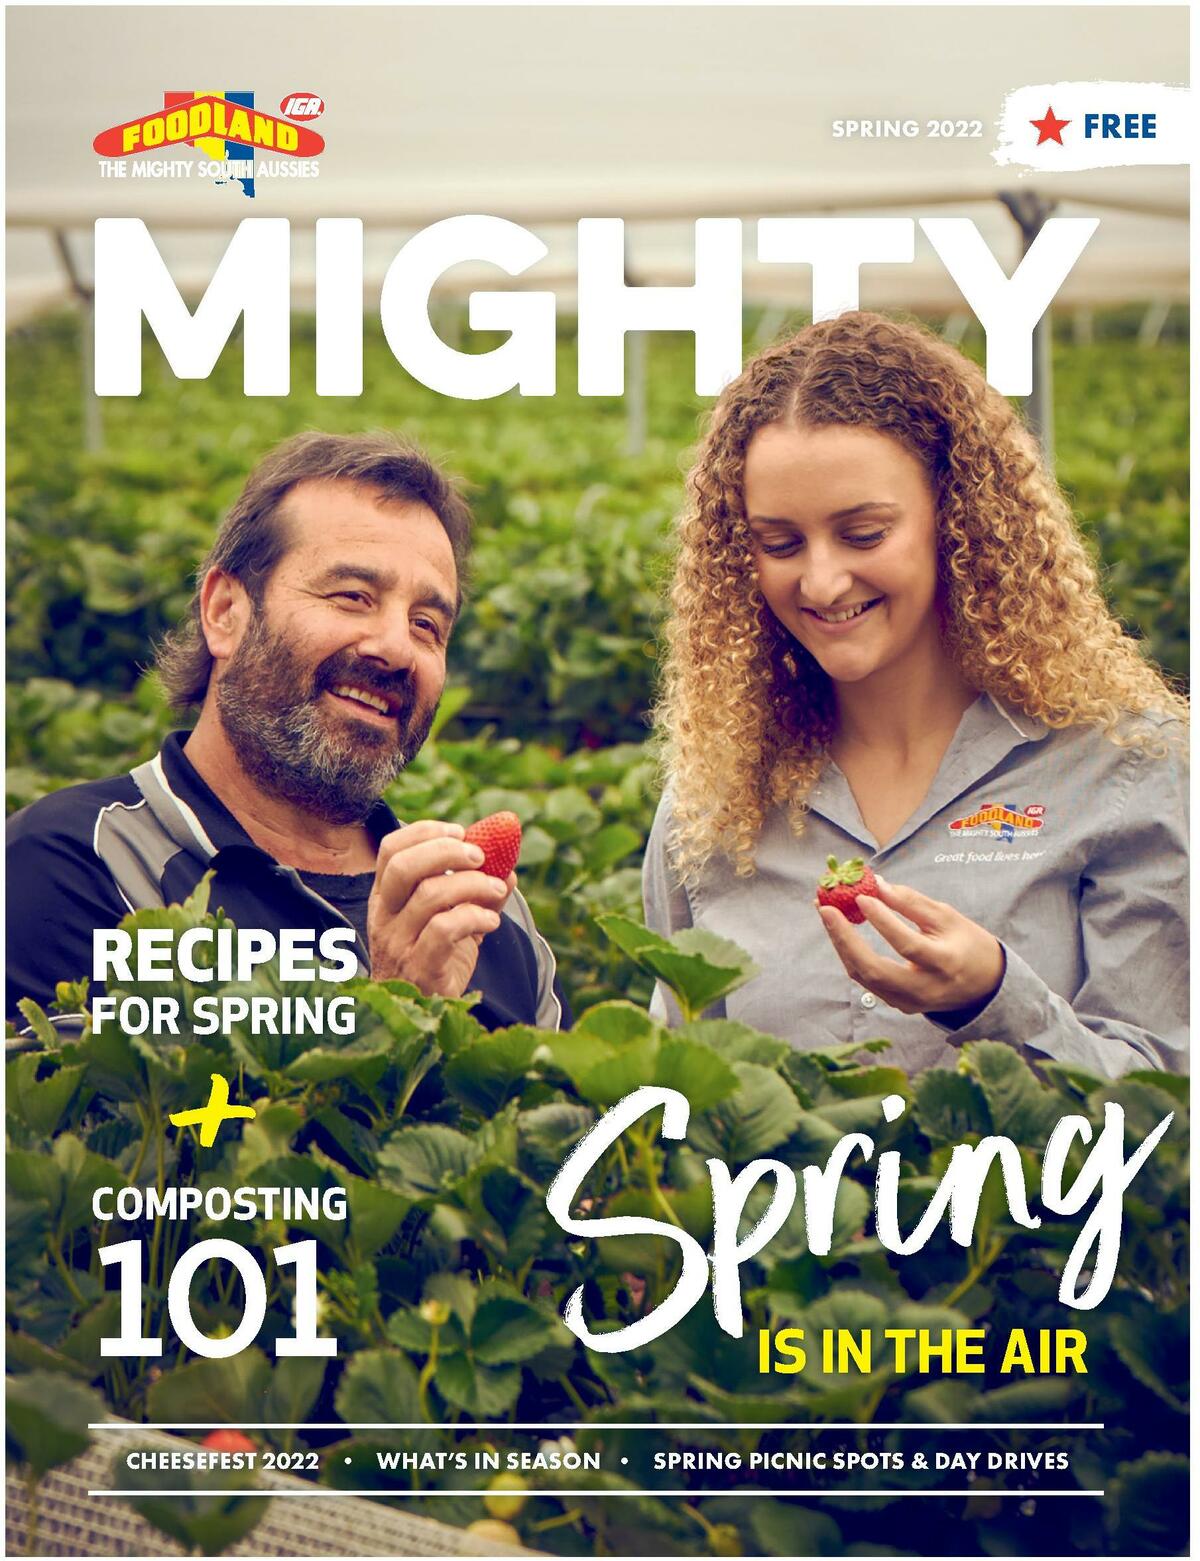 Foodland Magazine Spring Catalogues from 10 October